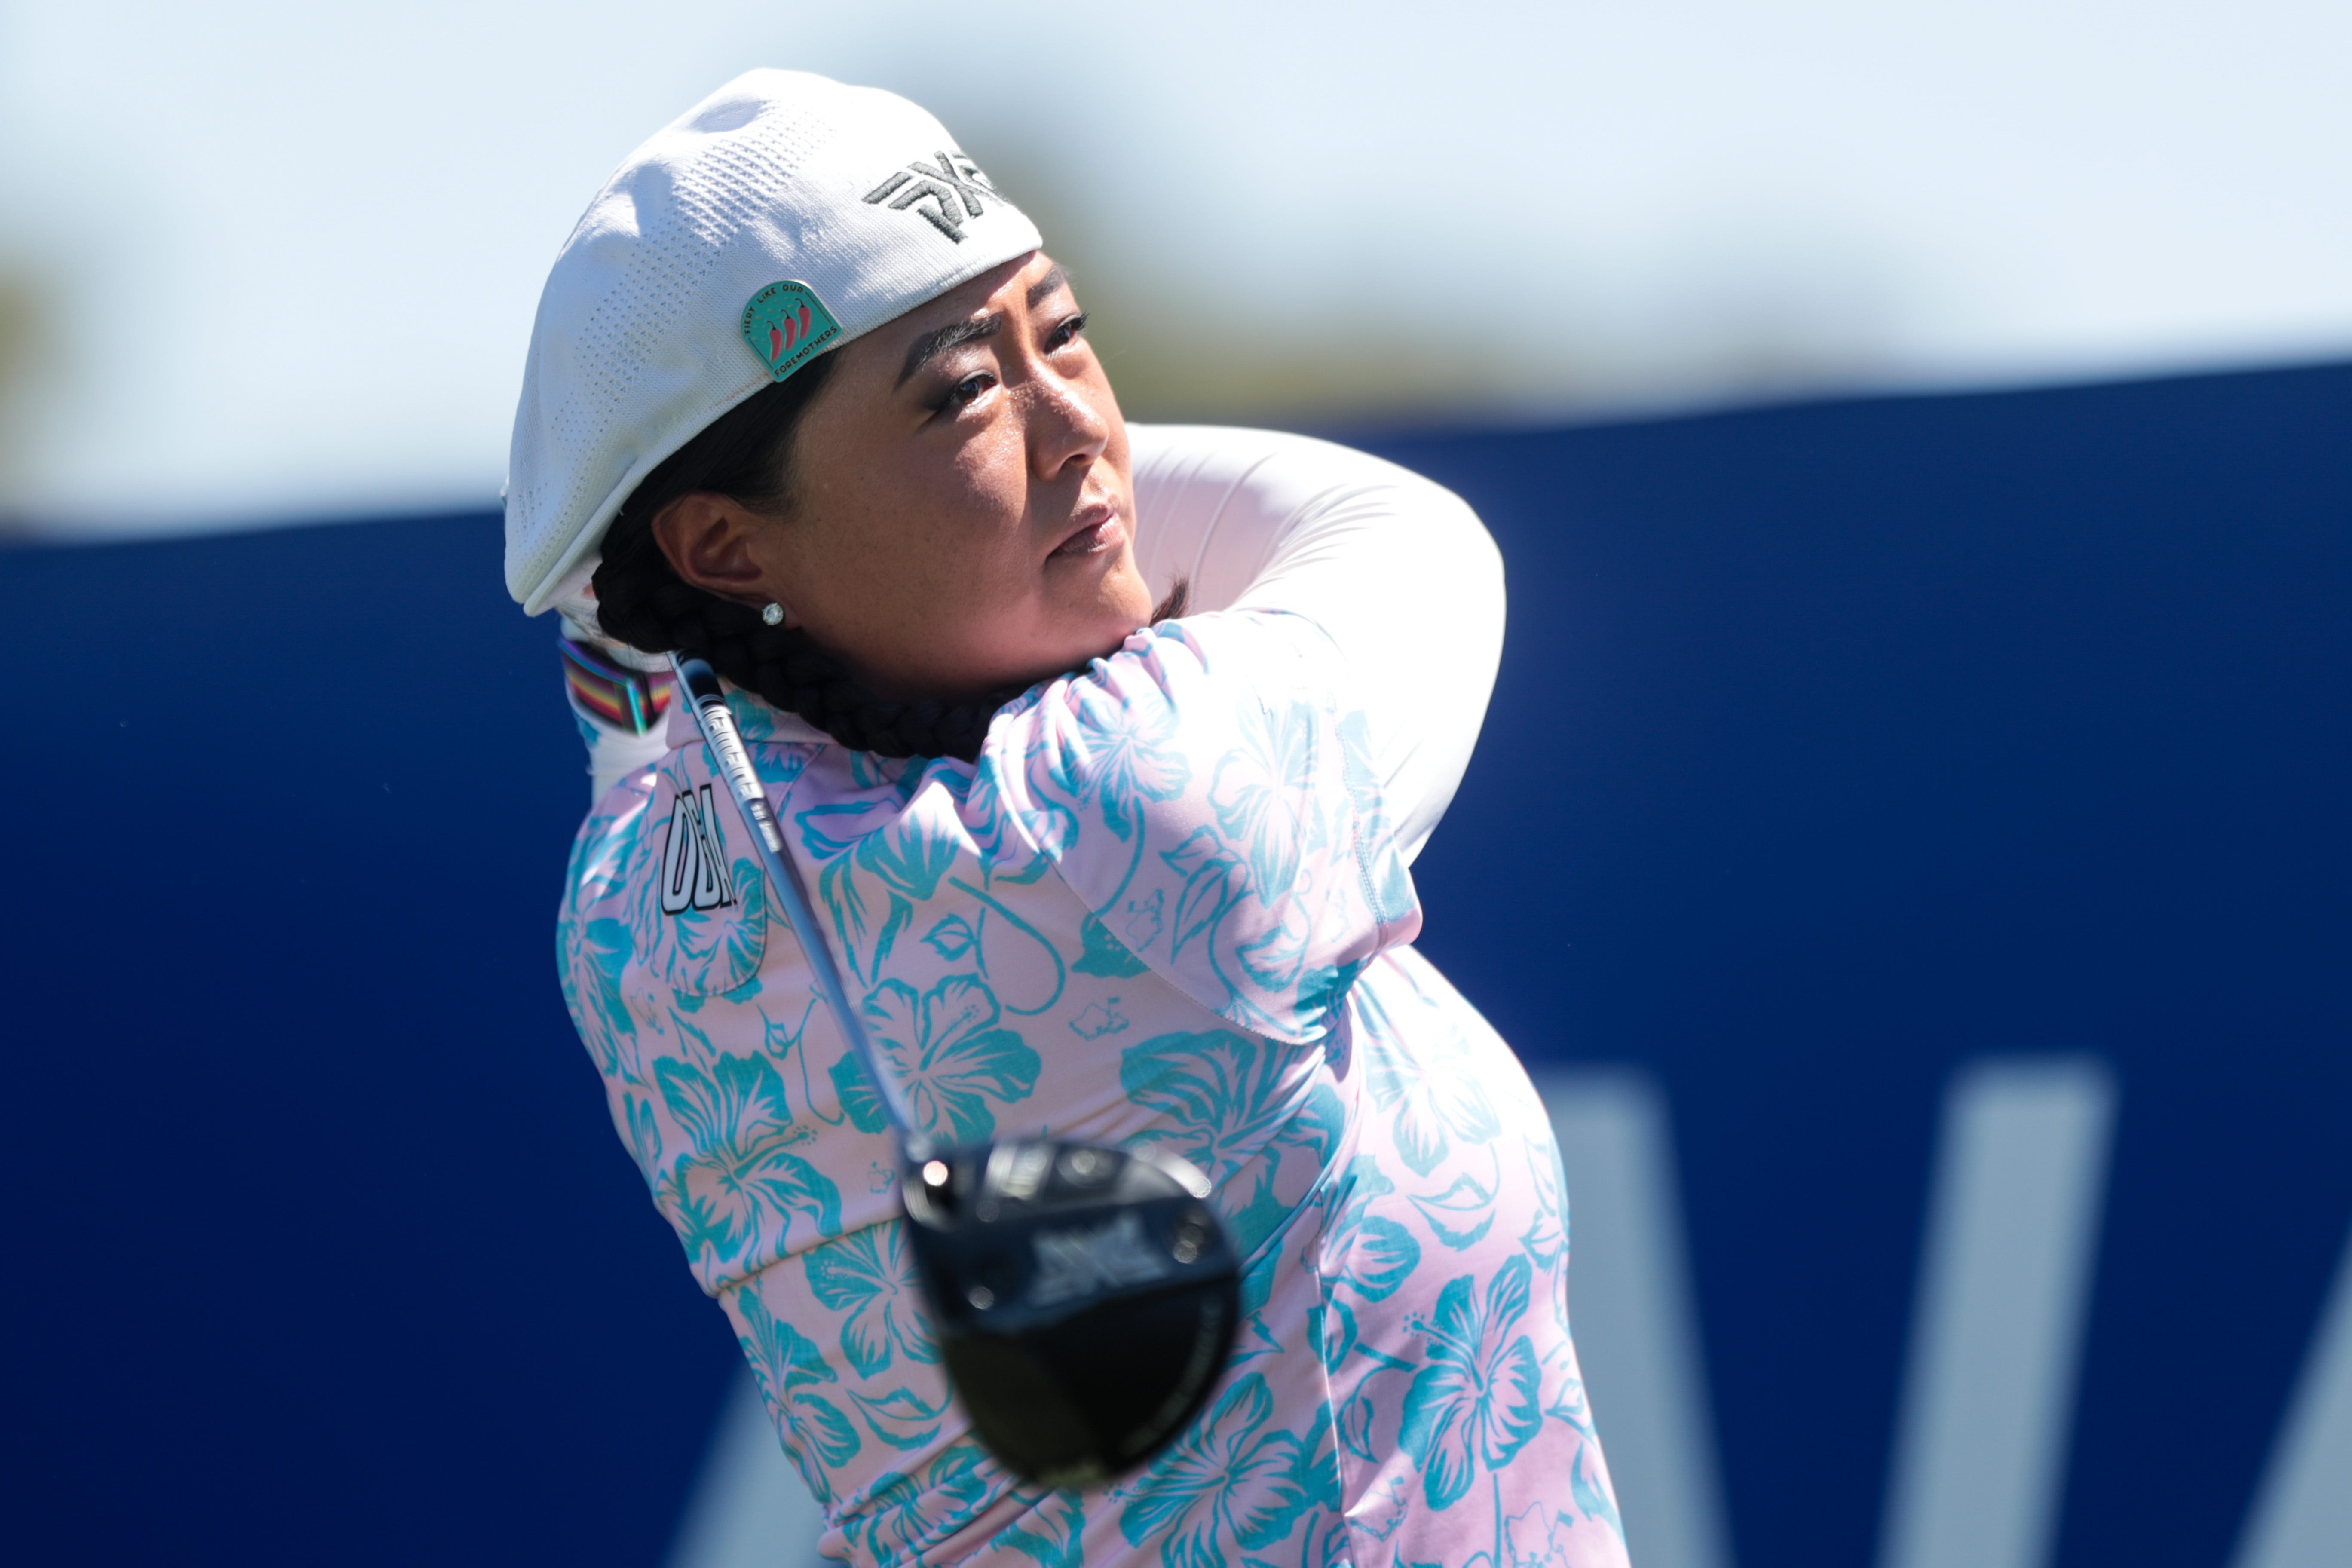 'It's absolutely disgusting': Christina Kim blasts Augusta National as LPGA major is forced to move thumbnail